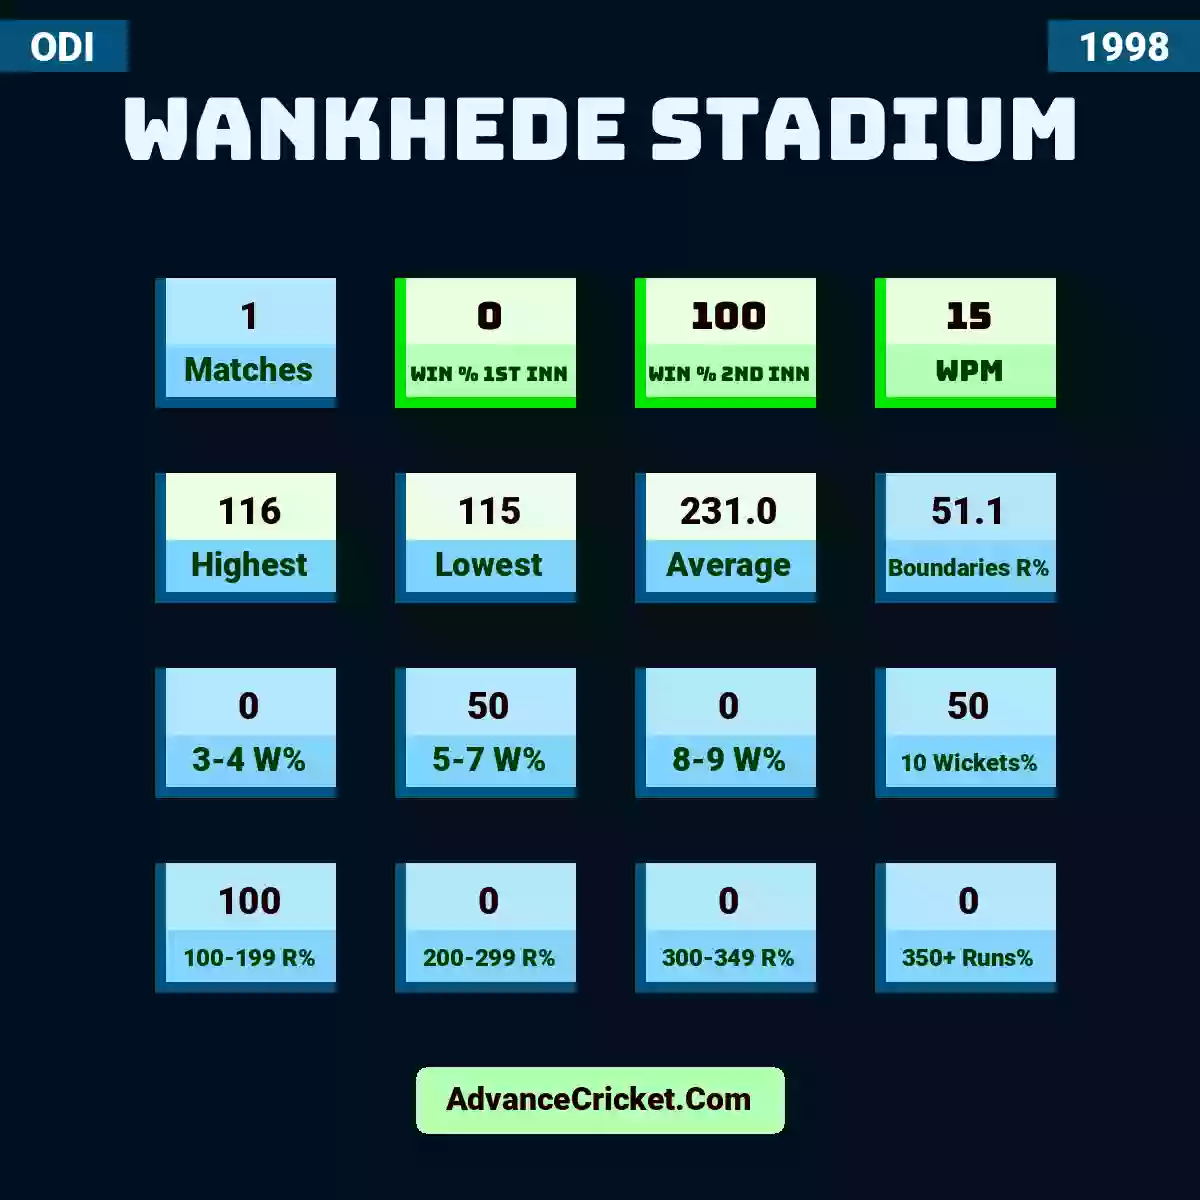 Image showing Wankhede Stadium with Matches: 1, Win % 1st Inn: 0, Win % 2nd Inn: 100, WPM: 15, Highest: 116, Lowest: 115, Average: 231.0, Boundaries R%: 51.1, 3-4 W%: 0, 5-7 W%: 50, 8-9 W%: 0, 10 Wickets%: 50, 100-199 R%: 100, 200-299 R%: 0, 300-349 R%: 0, 350+ Runs%: 0.